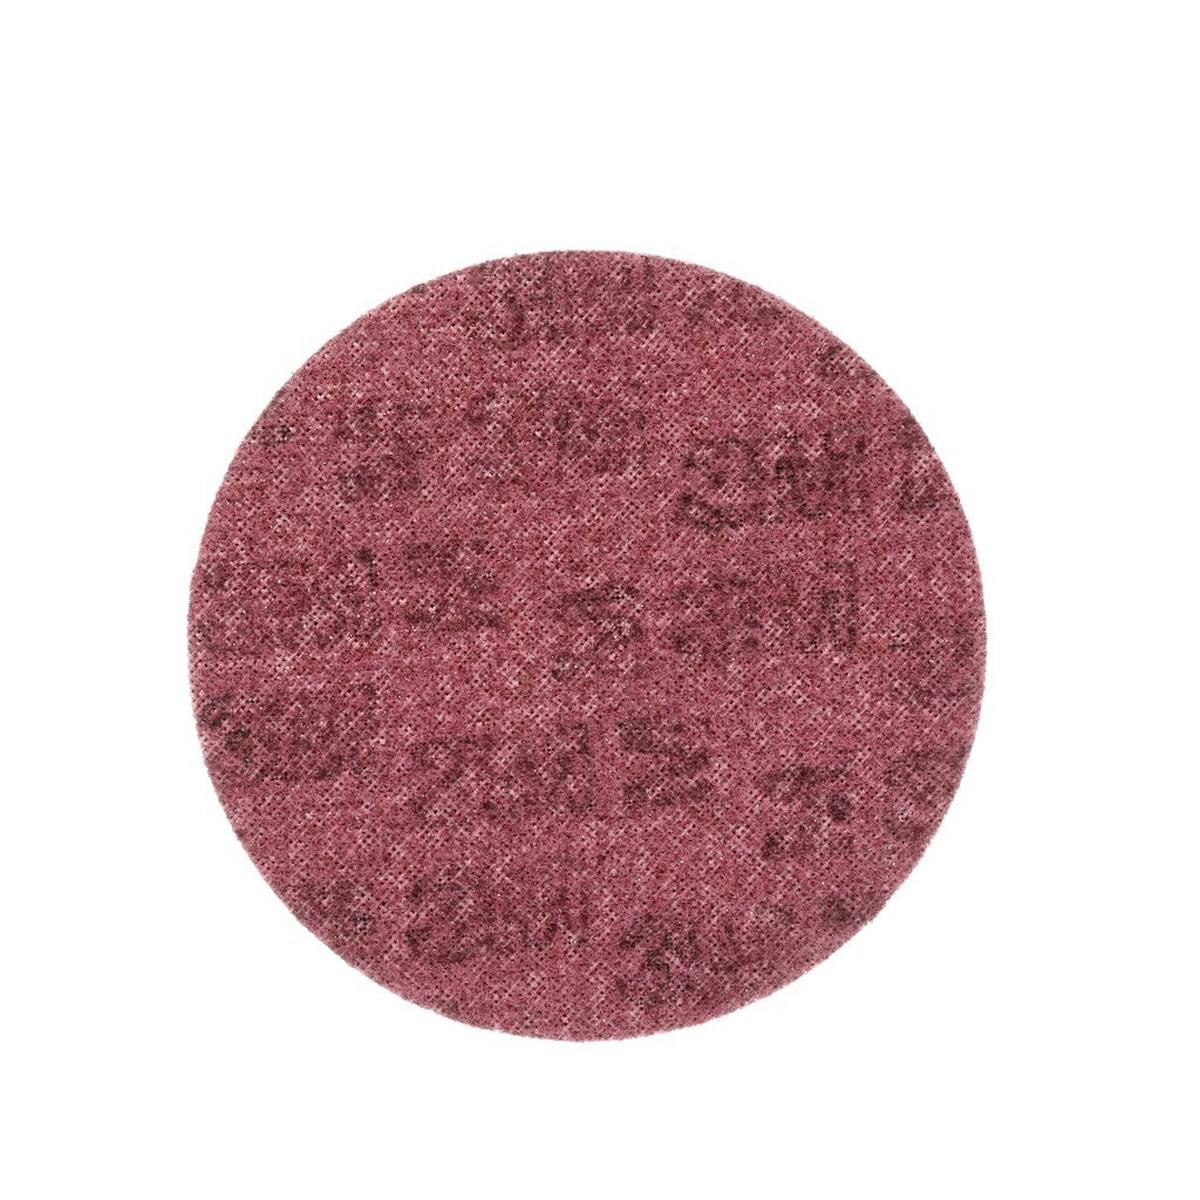 3M Scotch-Brite non-woven disc SC-DH without centering, red 150 mm, A, medium #109220